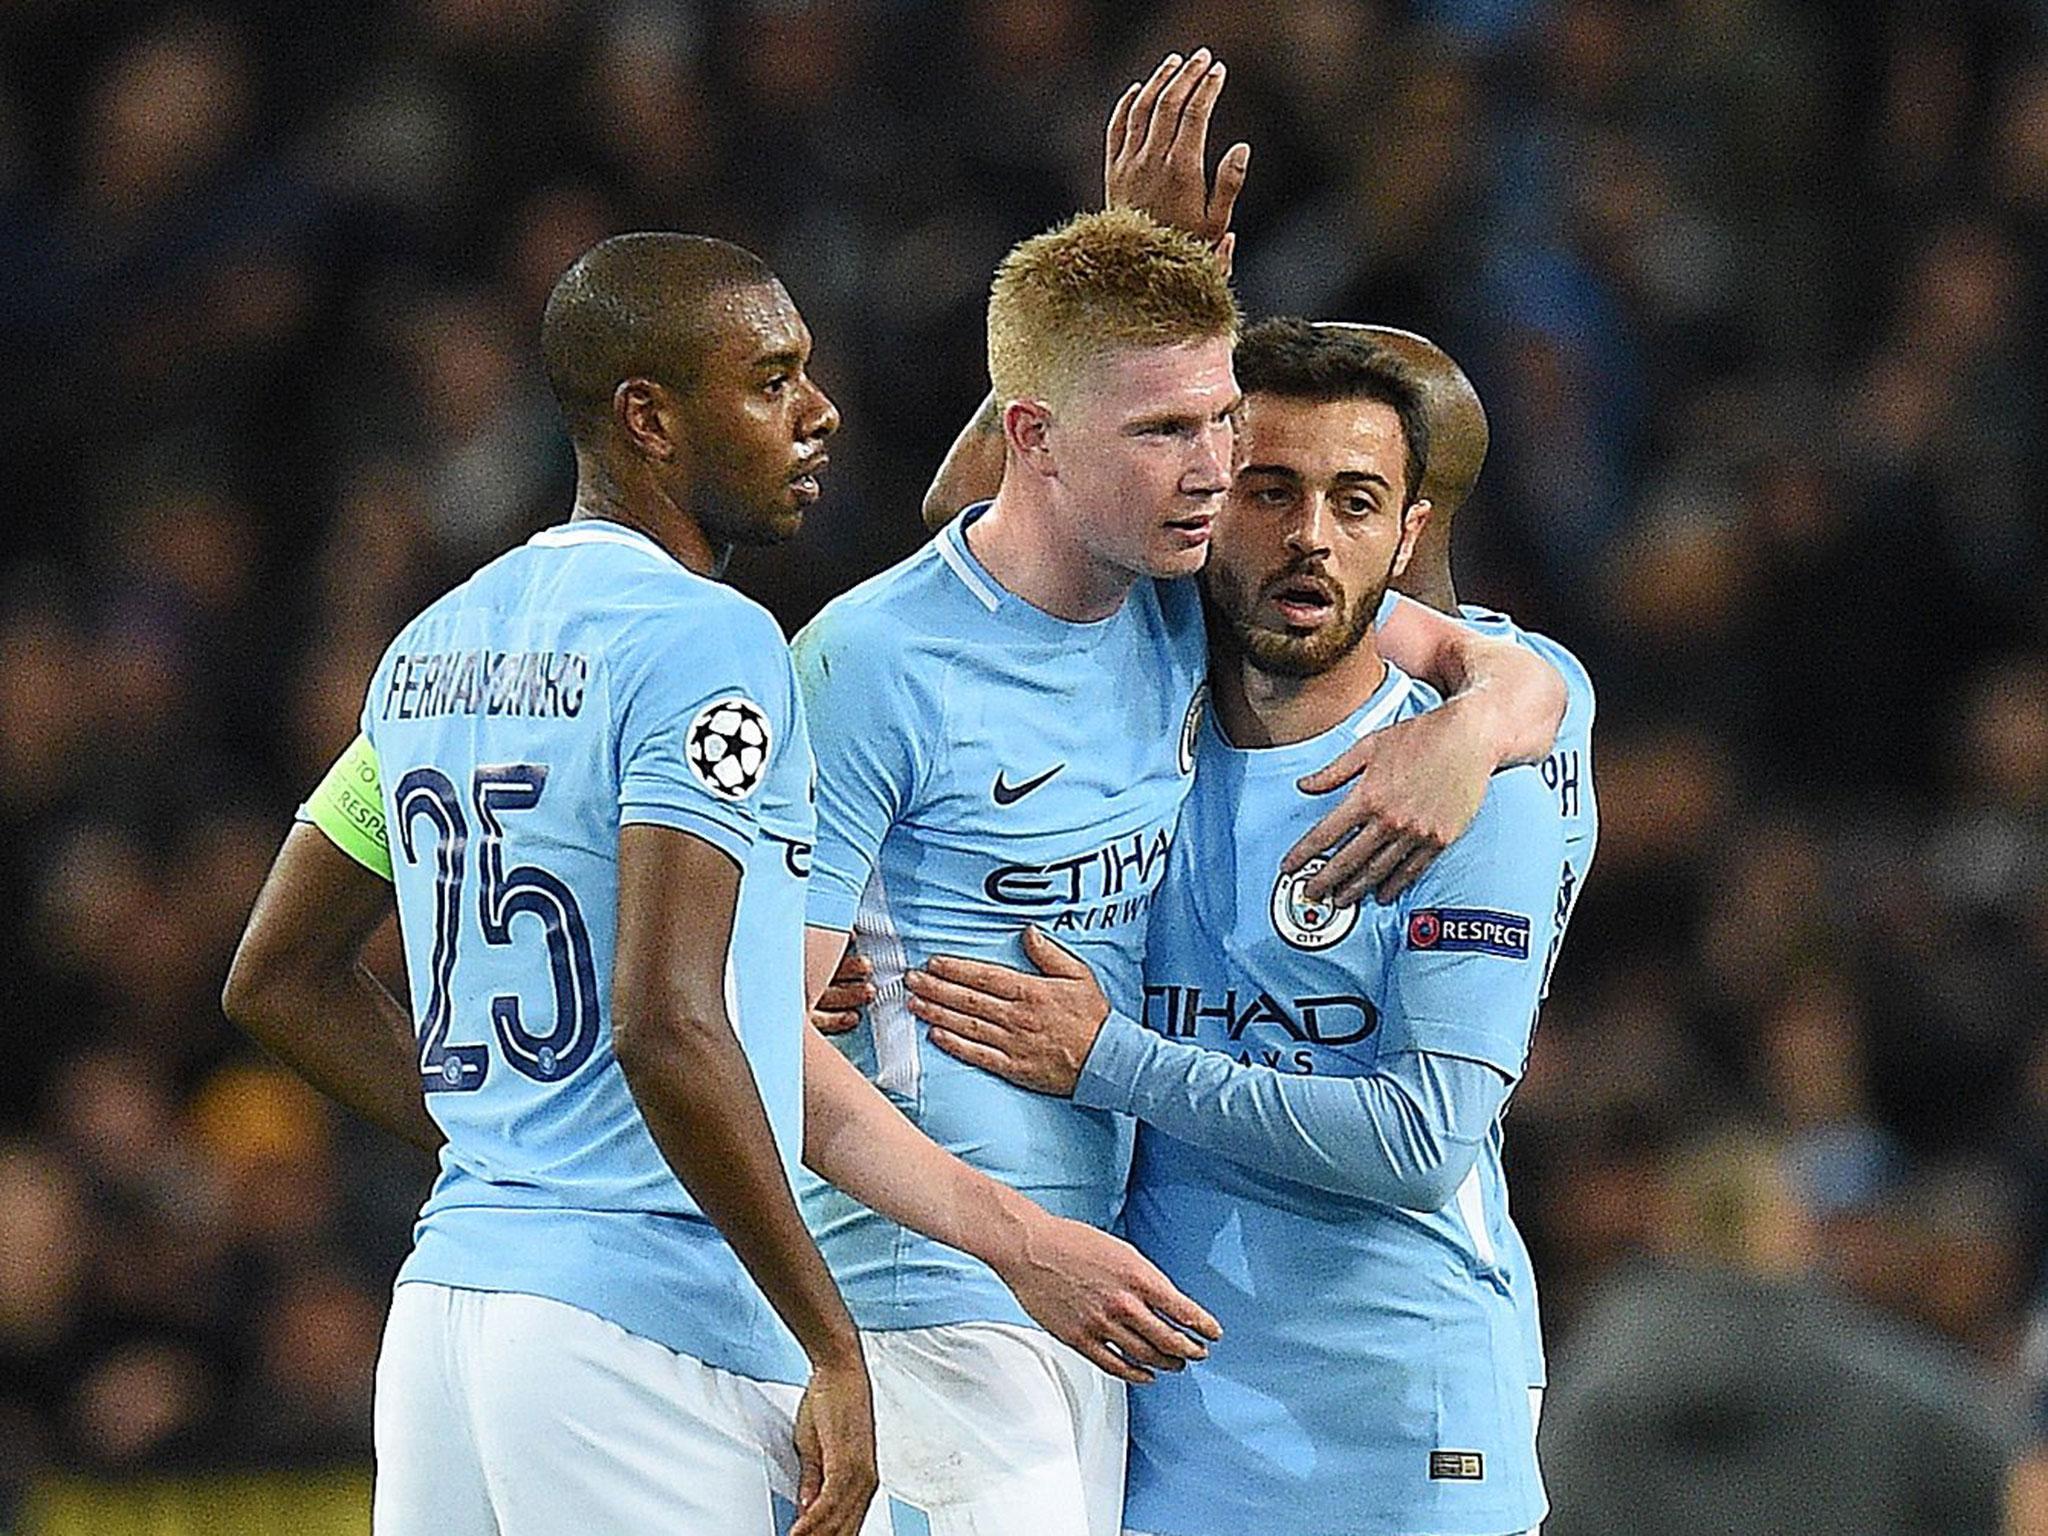 Kevin de Bruyne has enjoyed a brilliant start to the season with City